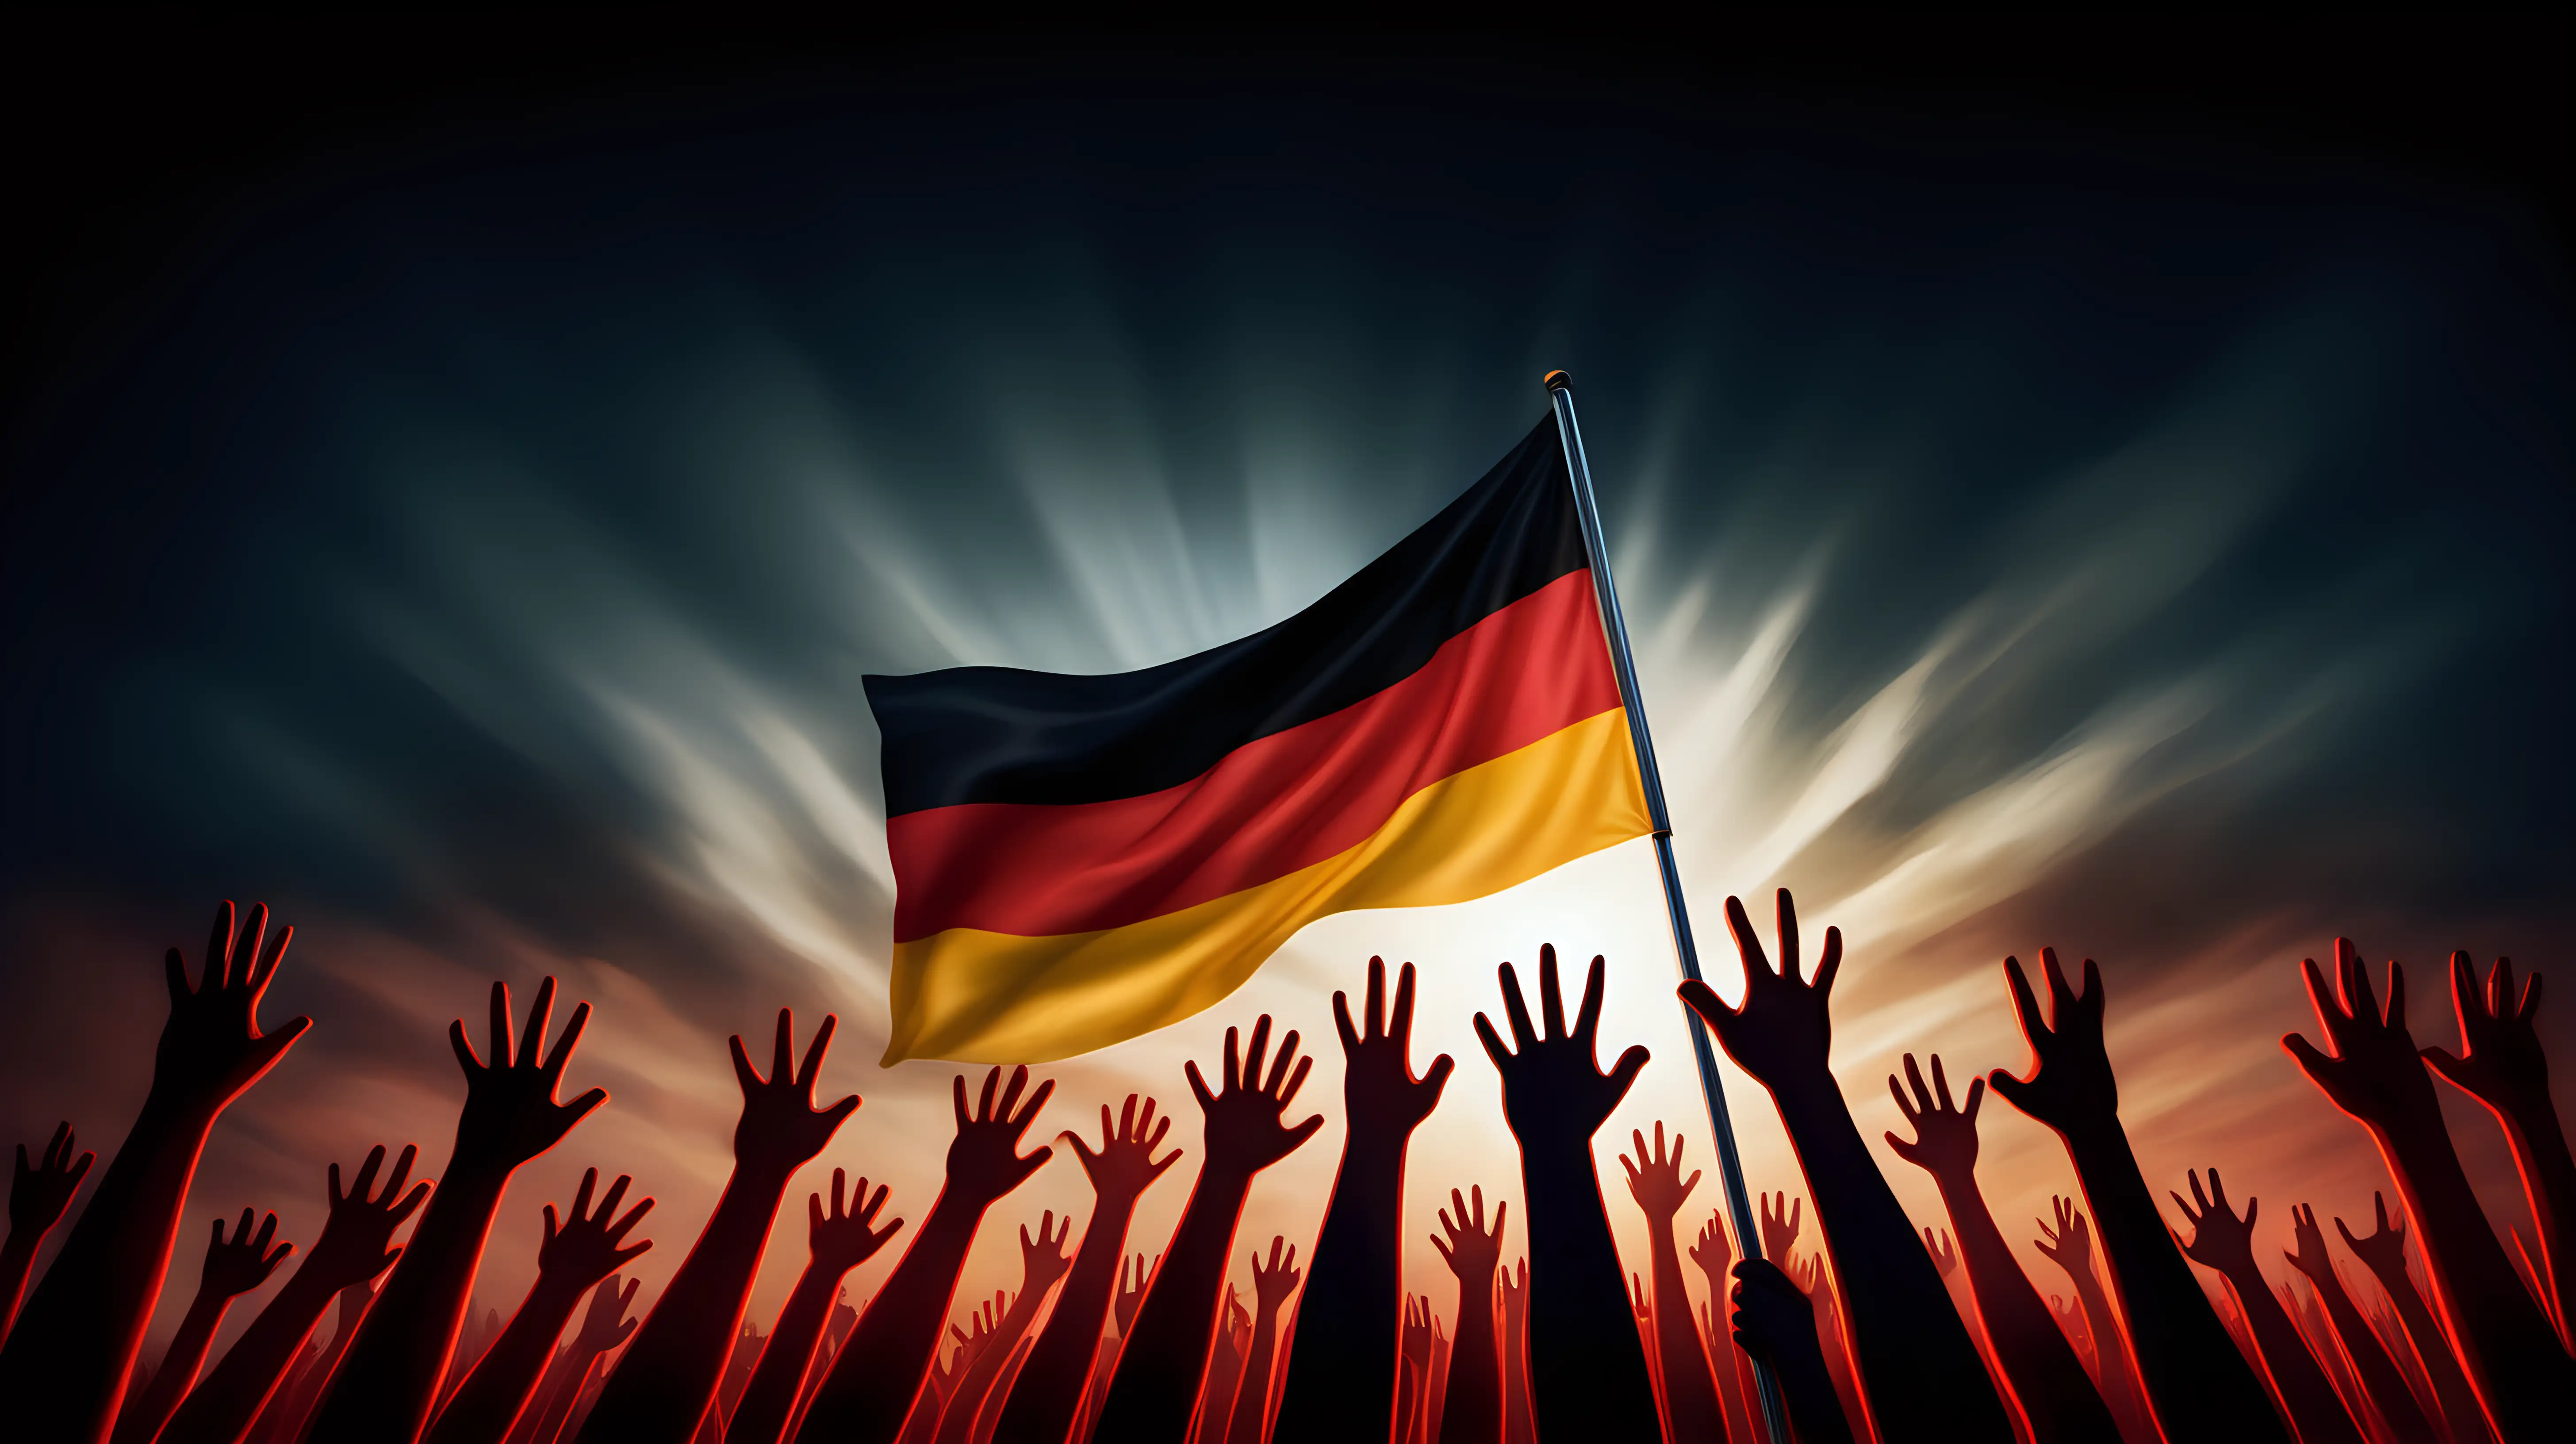 Illustrate a scene of national allegiance by capturing a person raising a glowing German flag with both hands, the vibrant illumination symbolizing their deep-rooted patriotism.